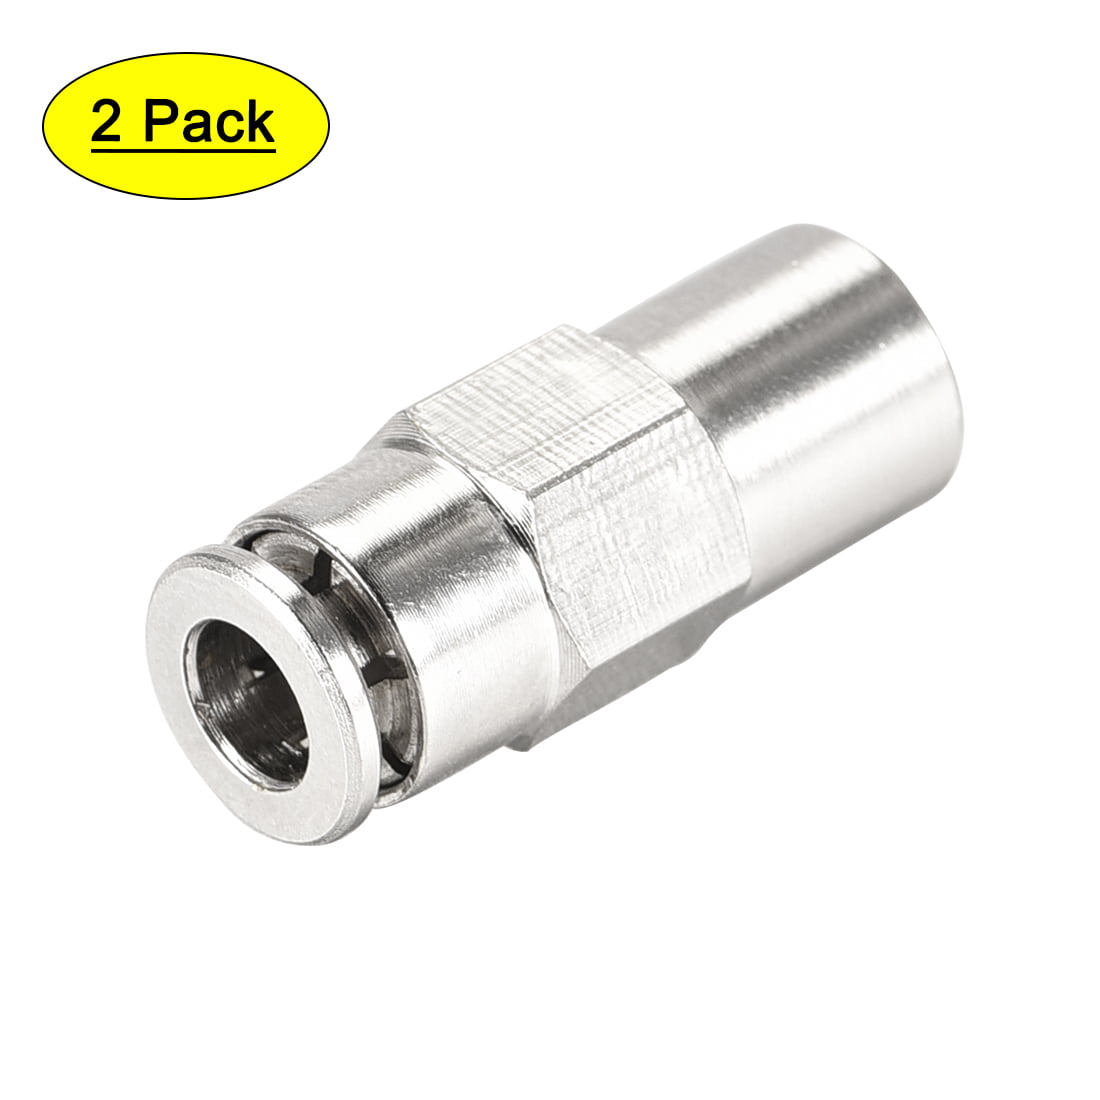 1/8" to 1 Threaded elbow 90 ° with Inner/Outer Thread Brass Nickel Plated m5 